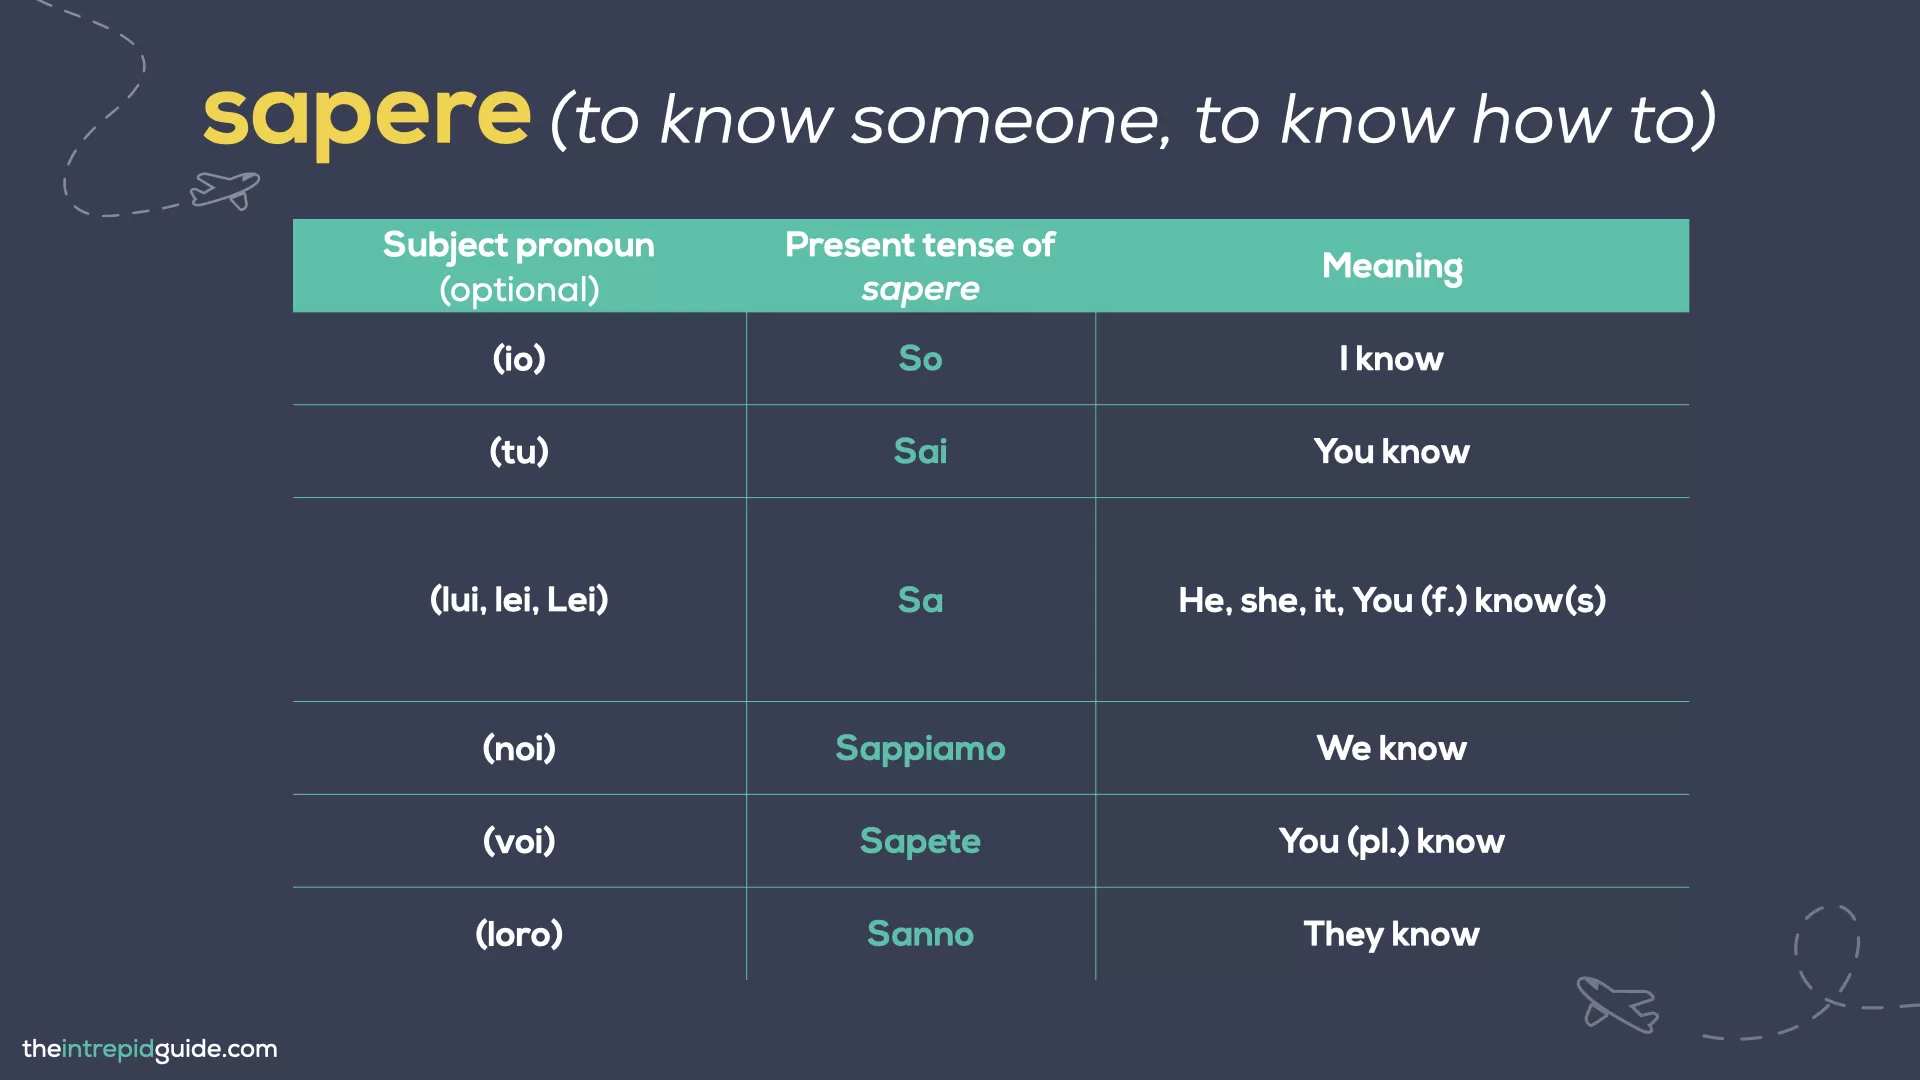 What is the difference between SAPERE and CONOSCERE - How to conjugate the verb SAPERE